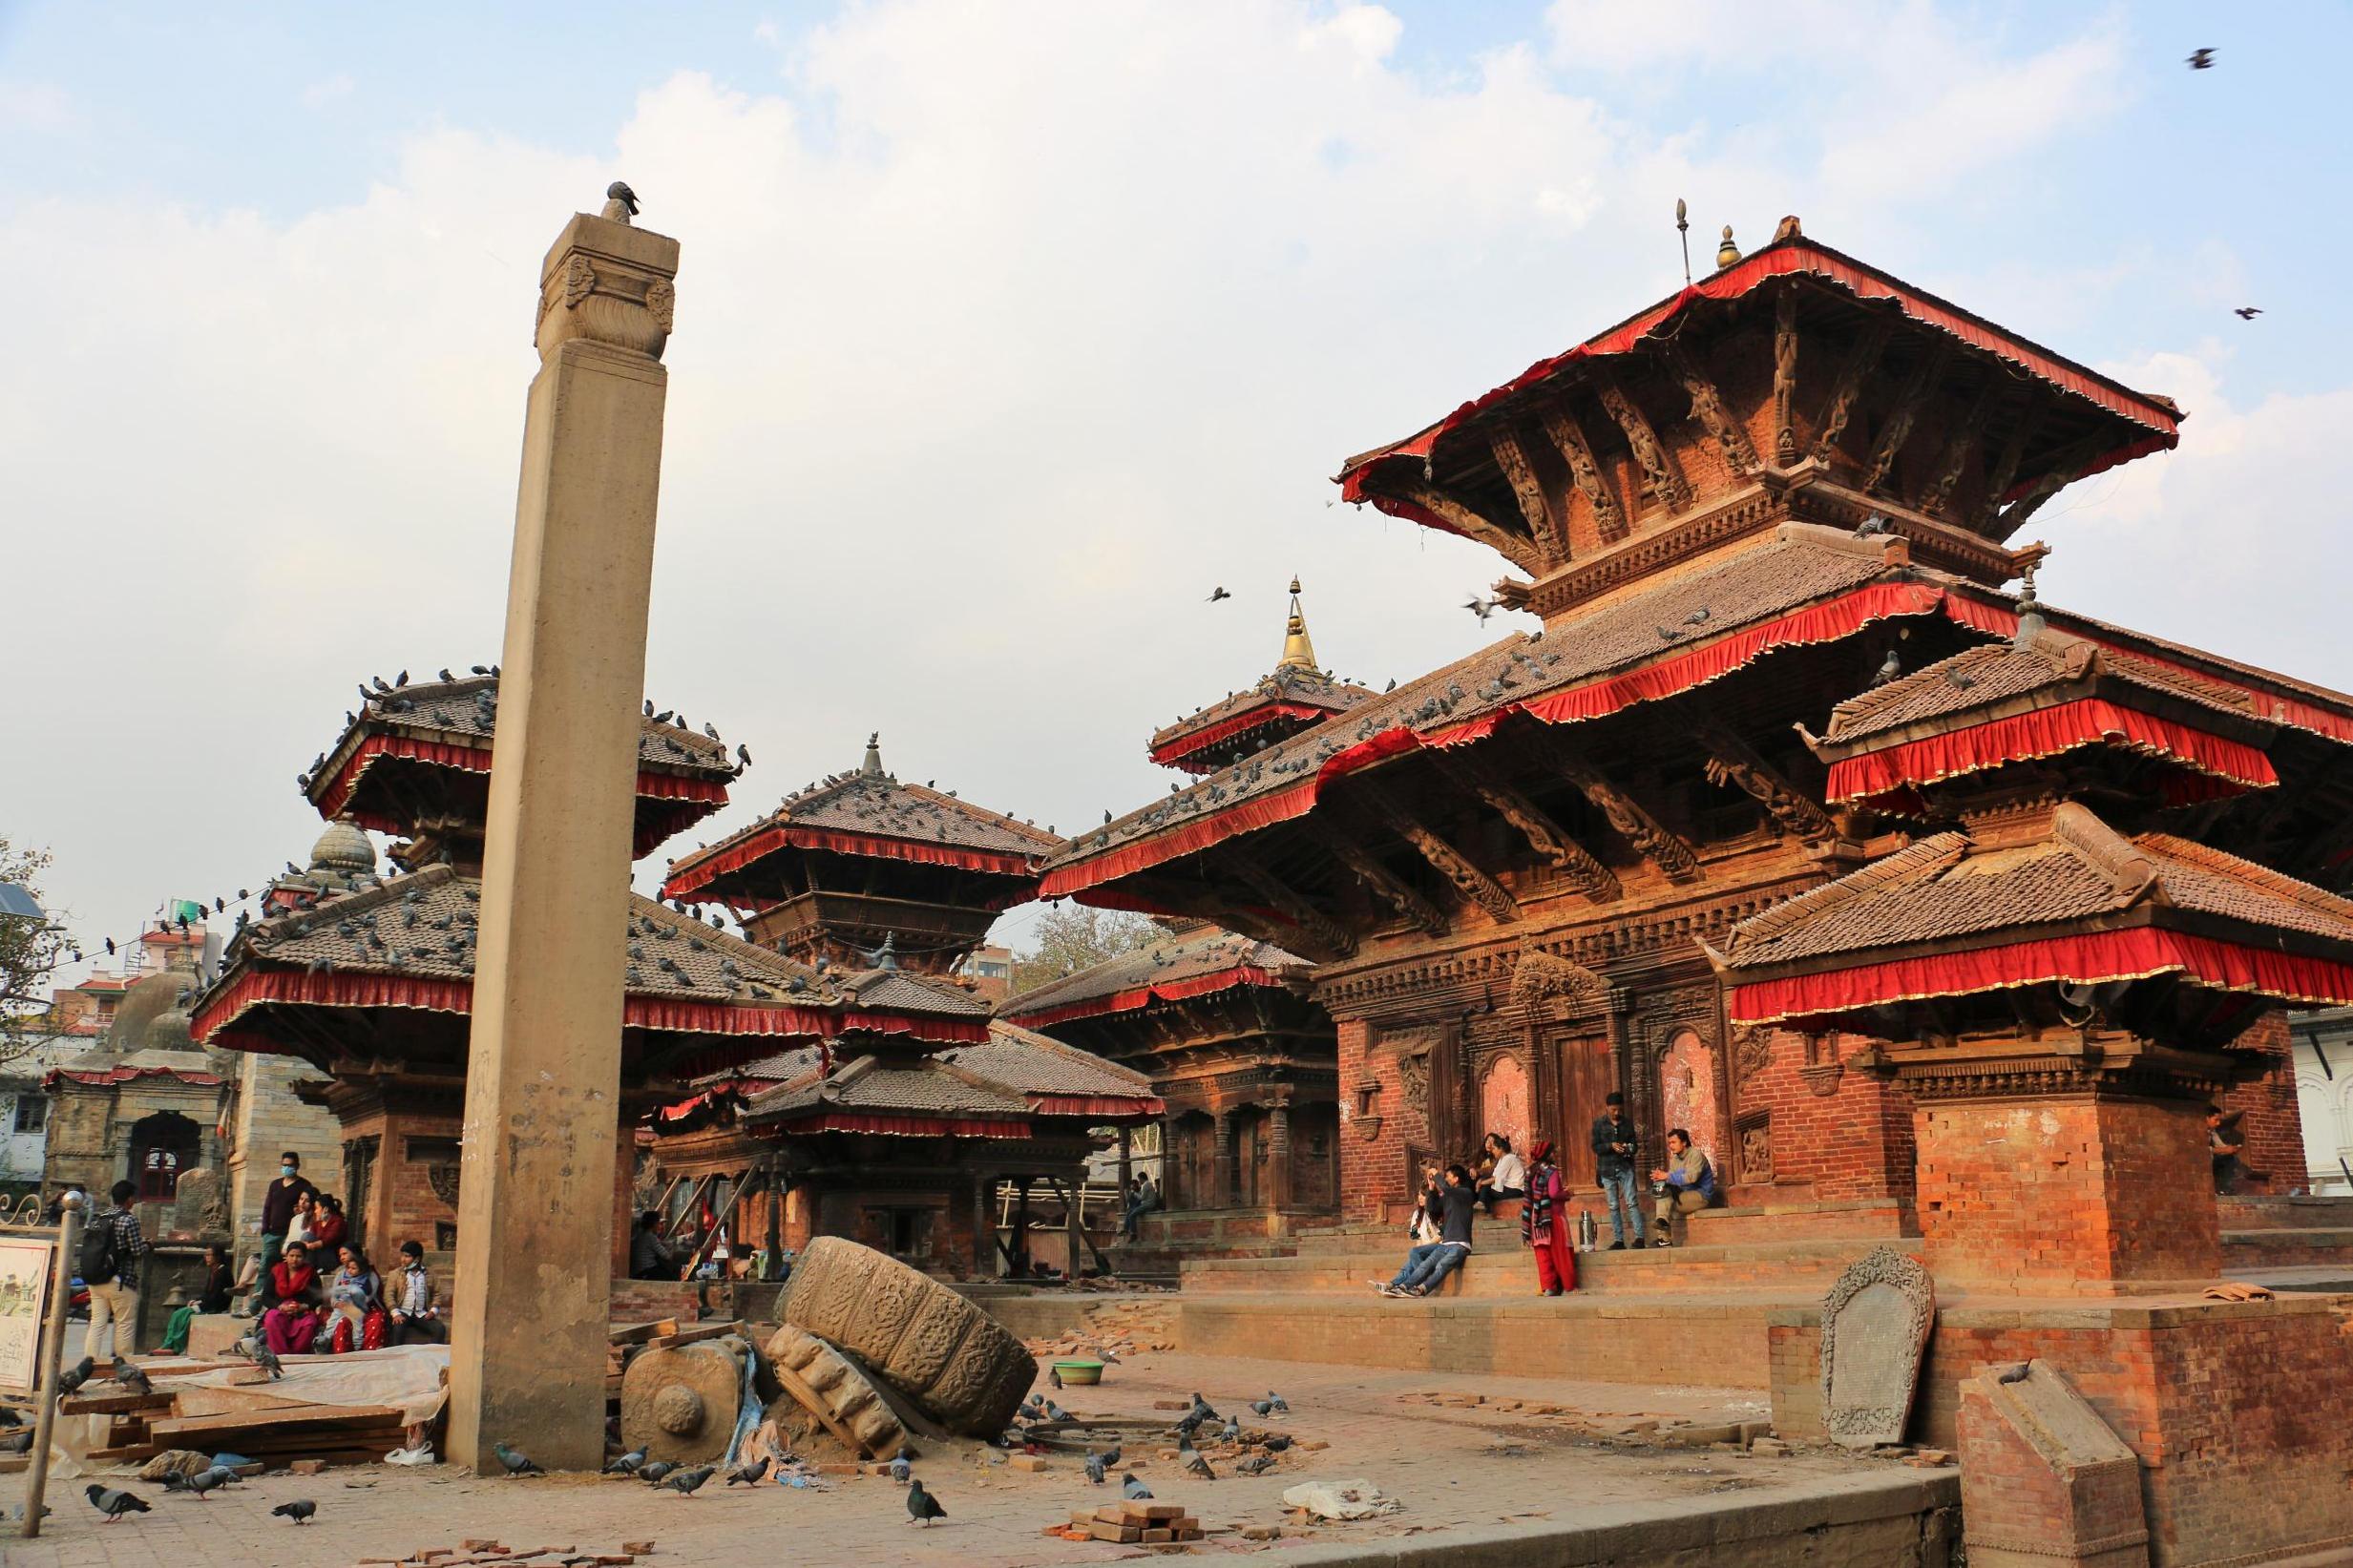 Many of the temples in Durbar Square were severely damaged